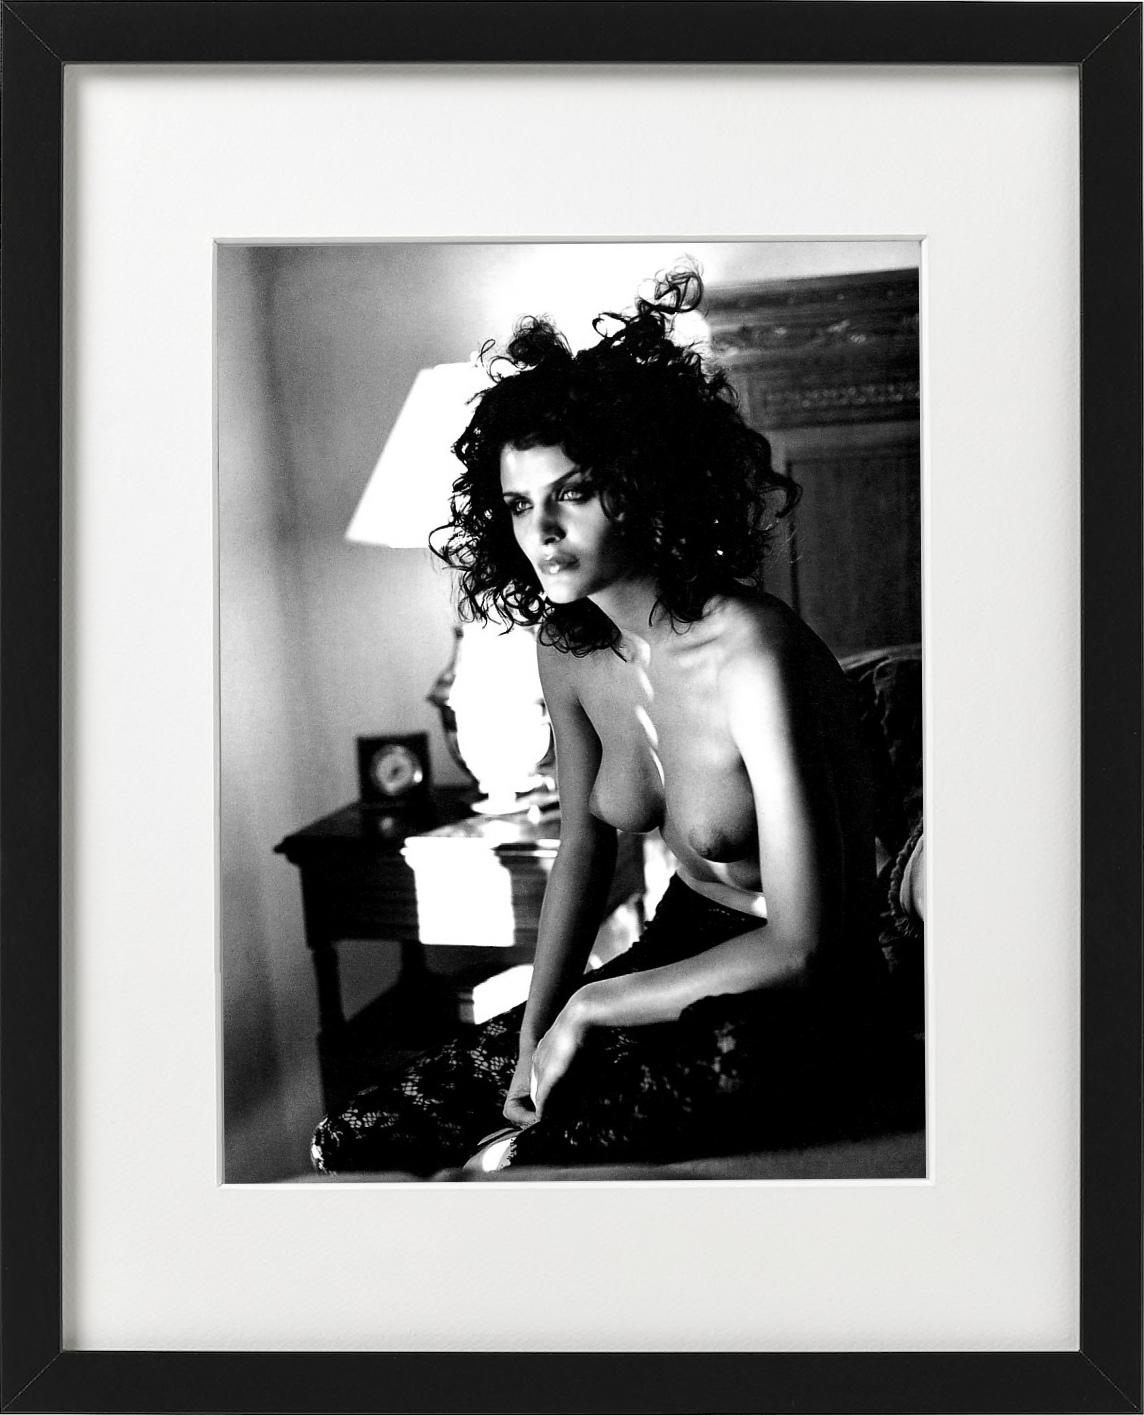 'Helena Christensen' - nude with tights in an hotel, fine art photography, 1995 - Contemporary Photograph by Sante D´ Orazio